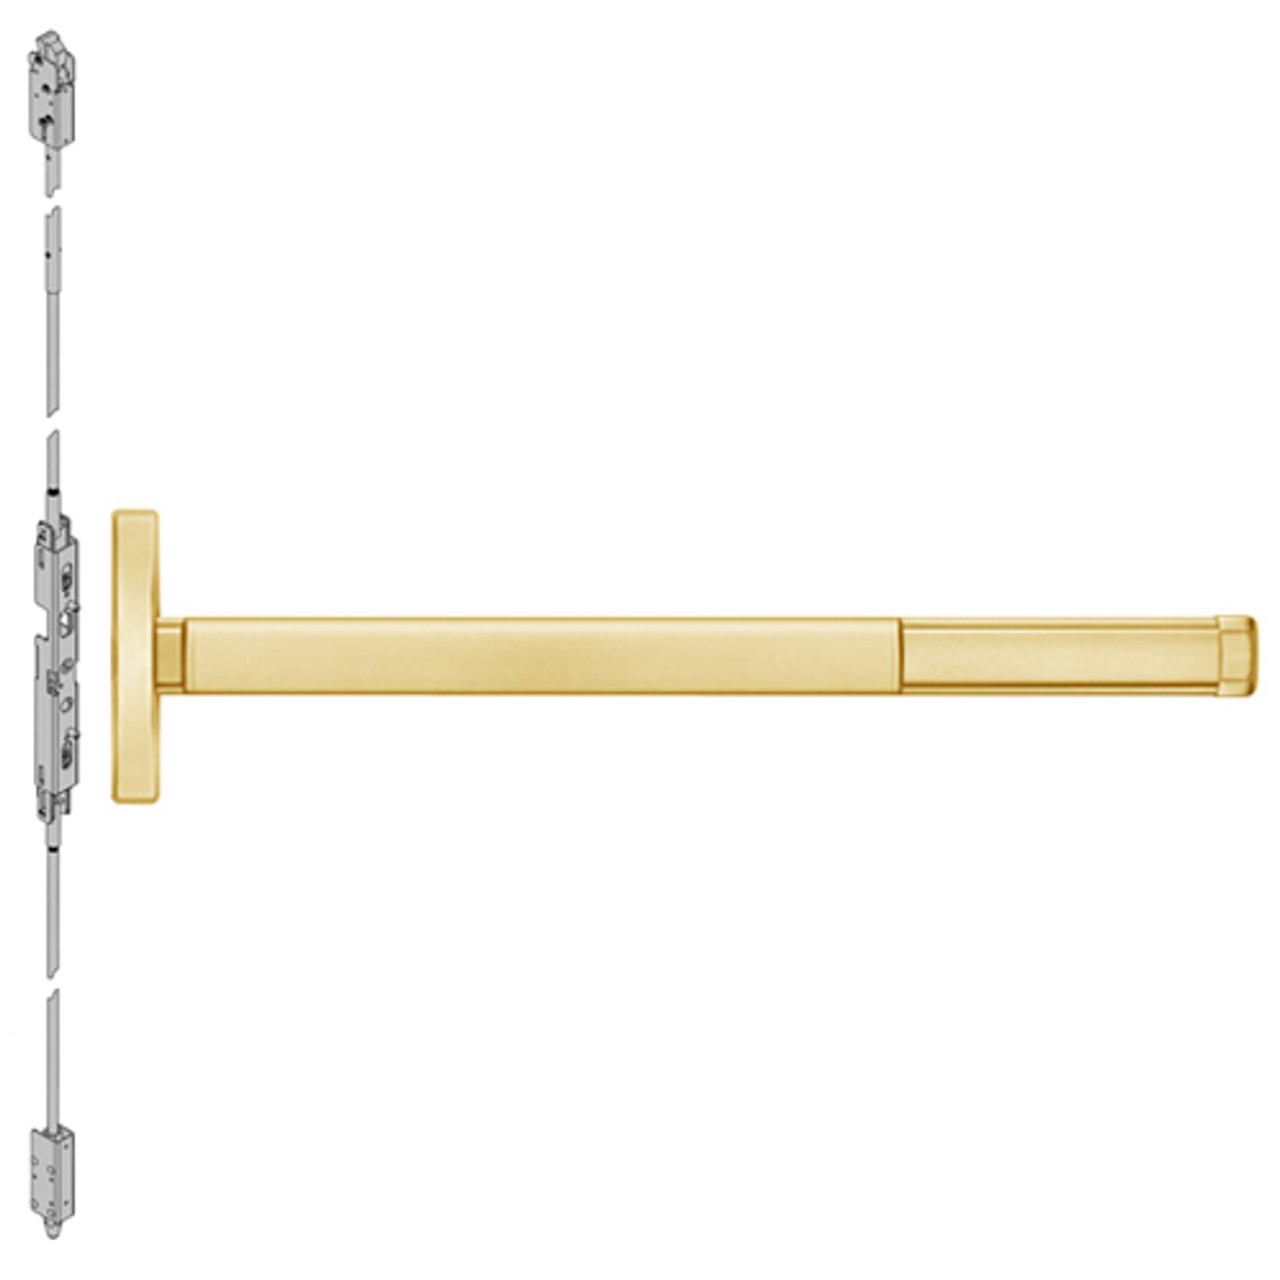 MLR2603-605-36 PHI 2600 Series Concealed Vertical Rod Exit Device with Motorized Latch Retraction Prepped for Key Retracts Latchbolt in Bright Brass Finish